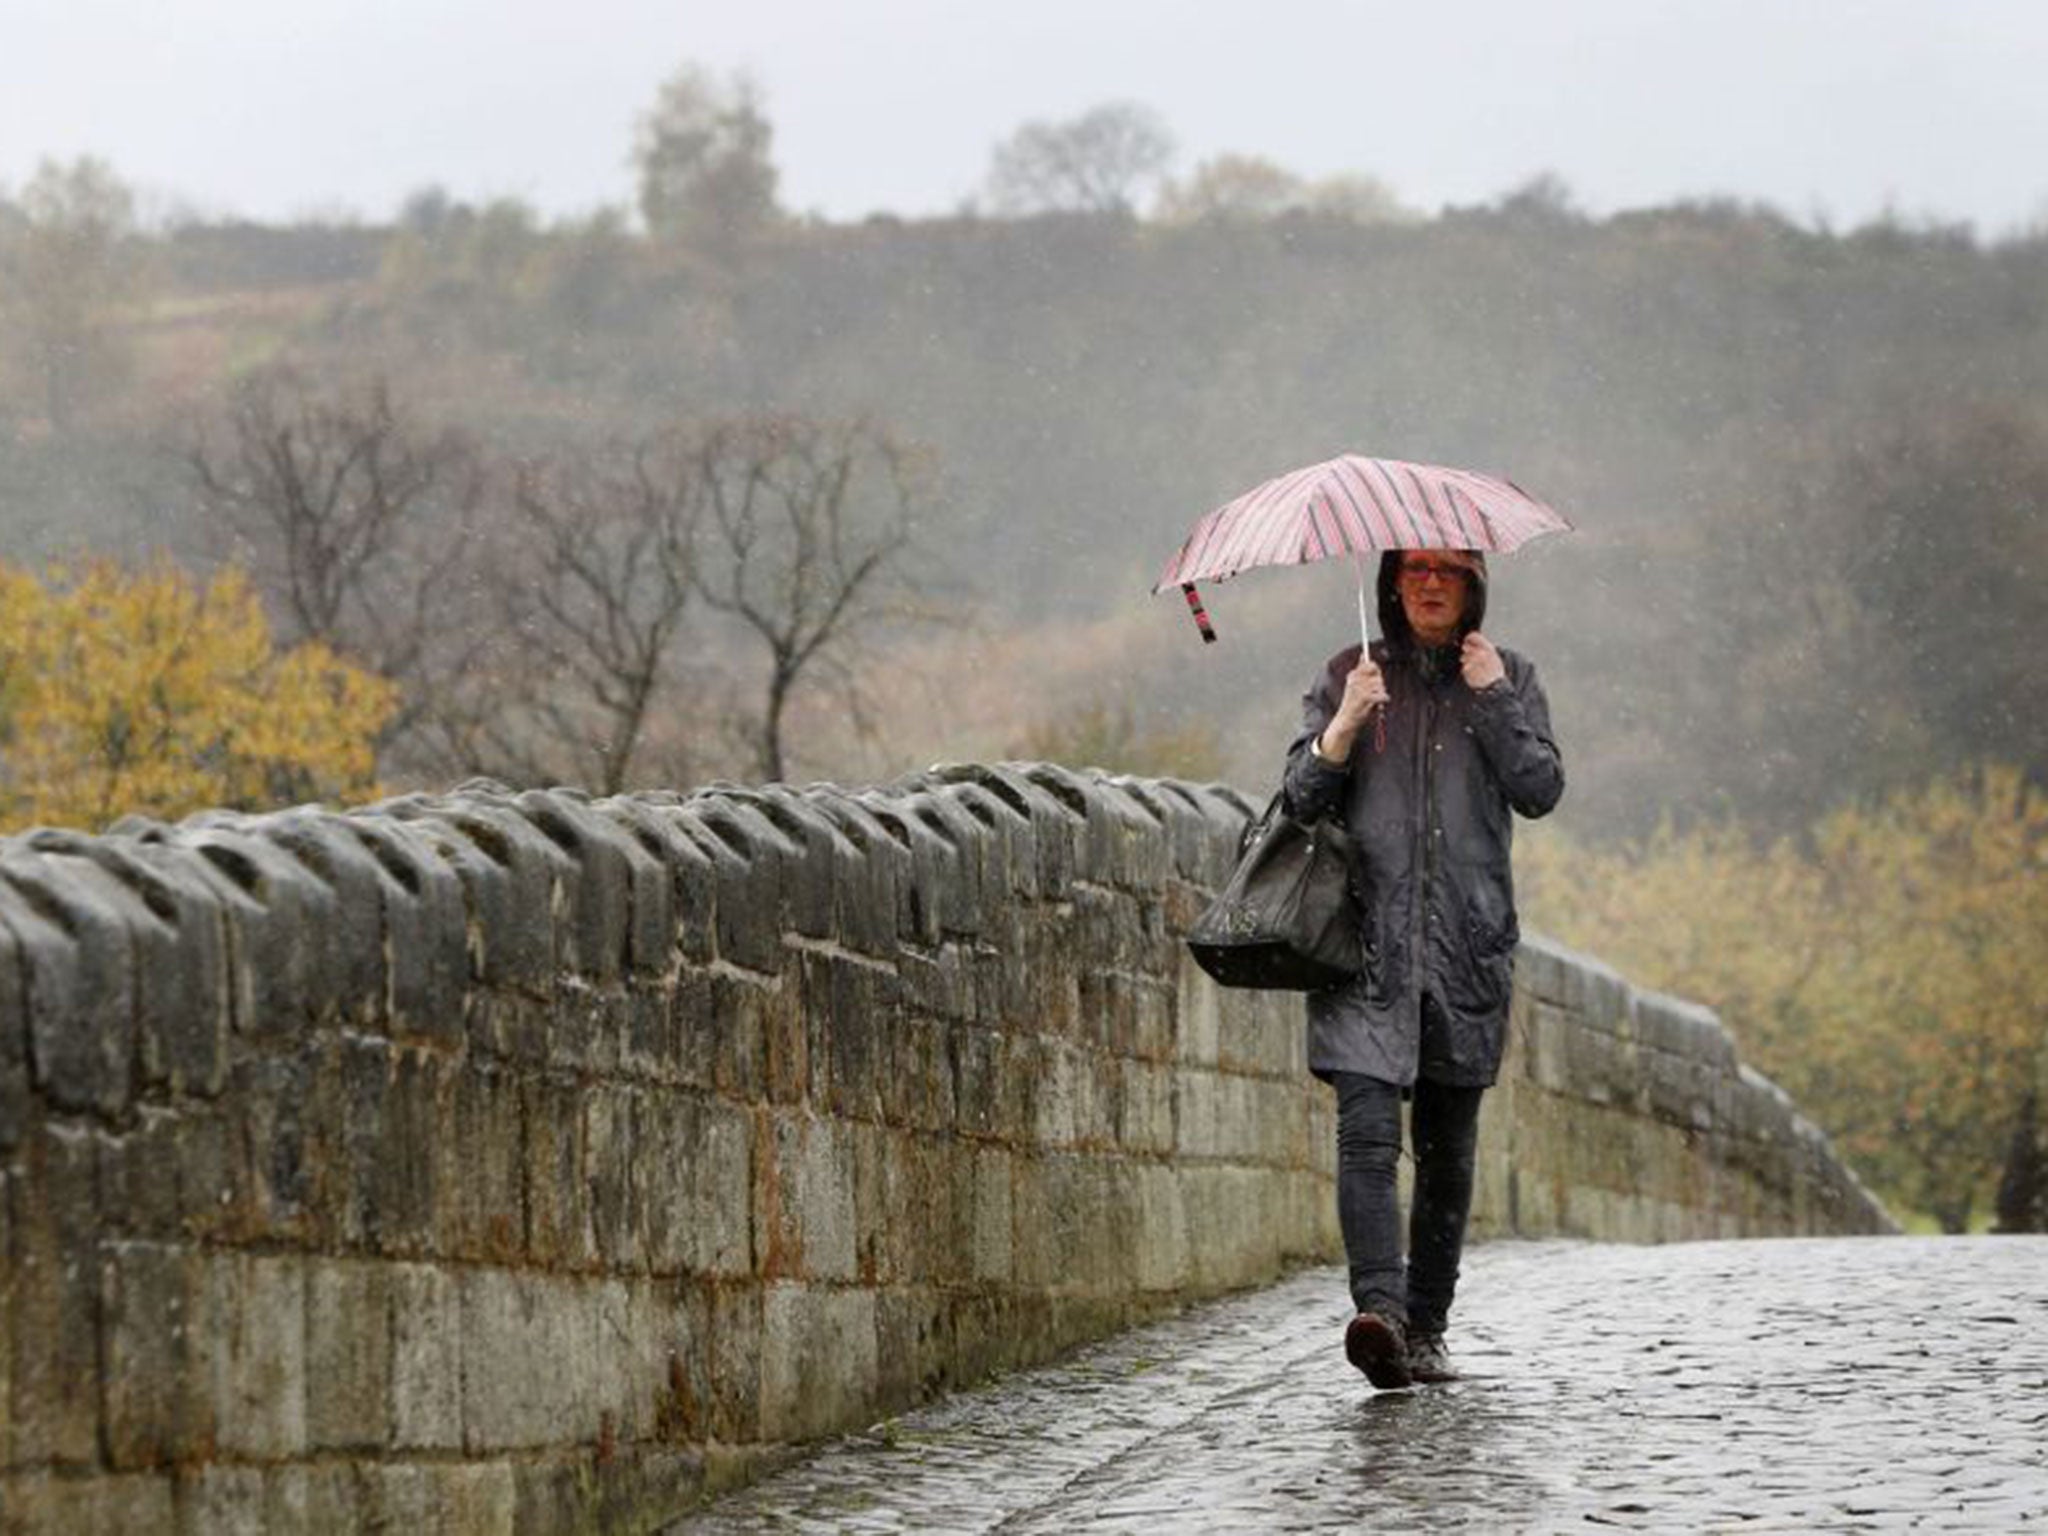 Last week's hot and dry spell will give way to more changeable conditions this week